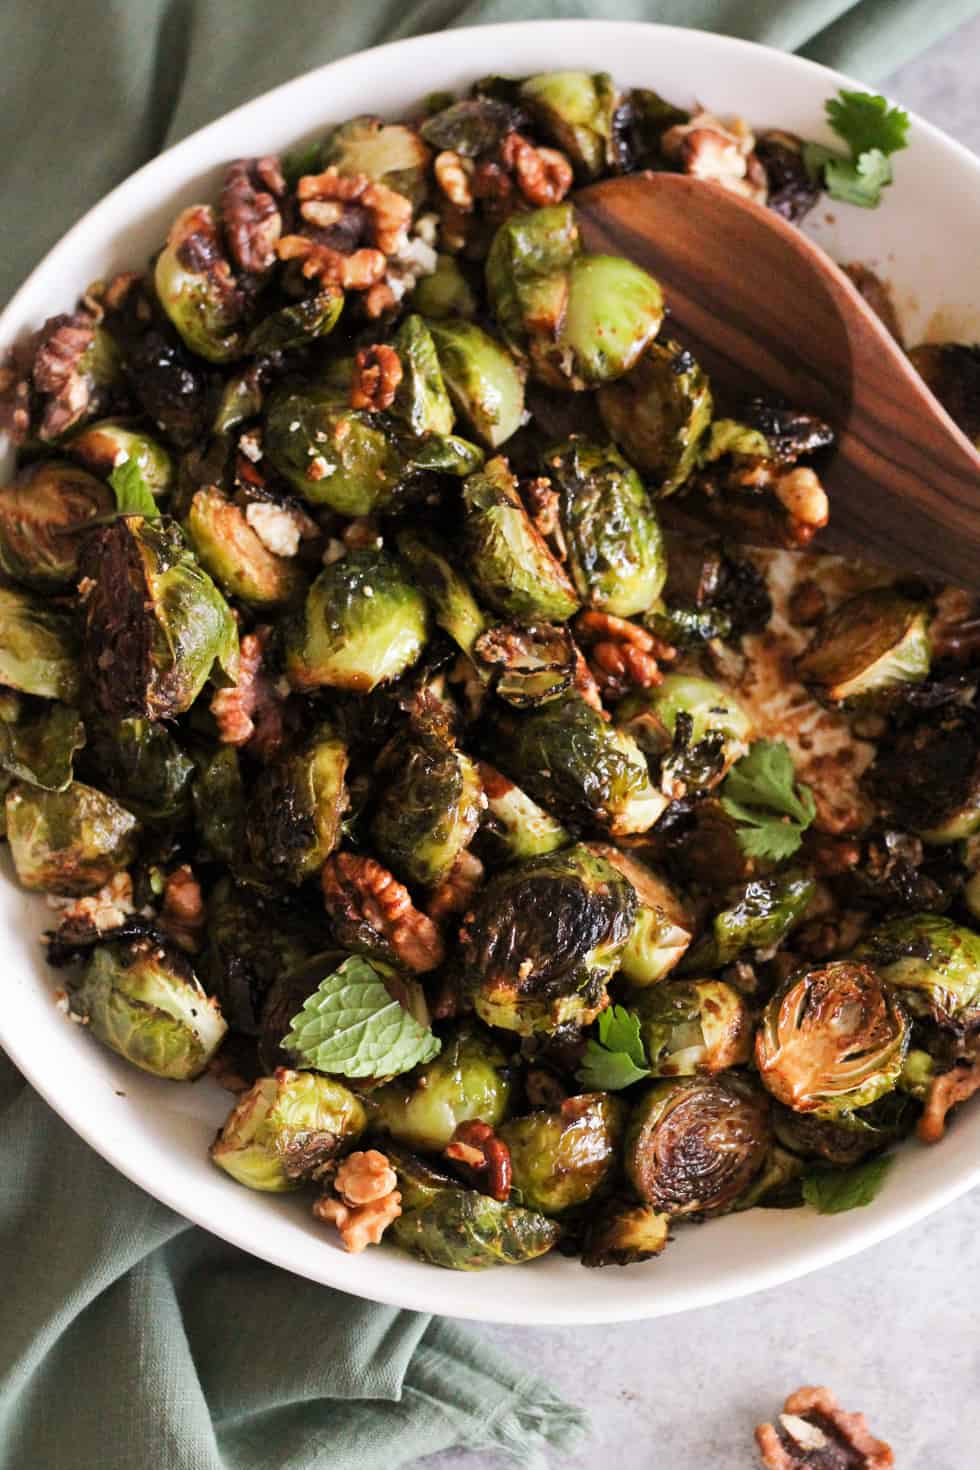 Closeup image of crispy roasted brussels sprouts in white dish with wooden spoon.